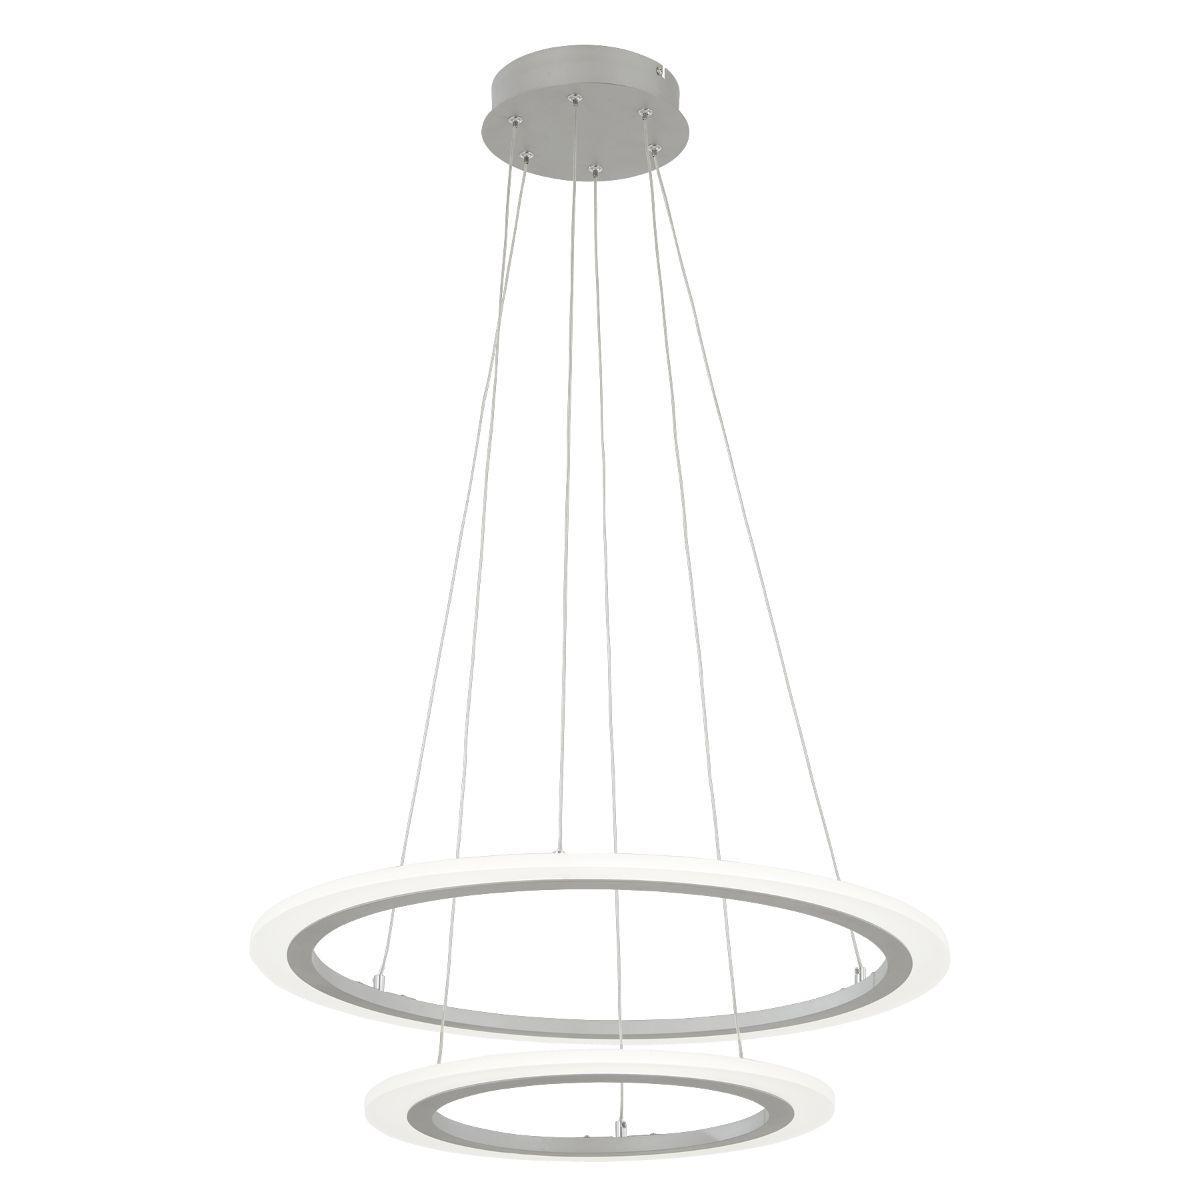 Discovery 24 in. LED Pendant Light Silver finish